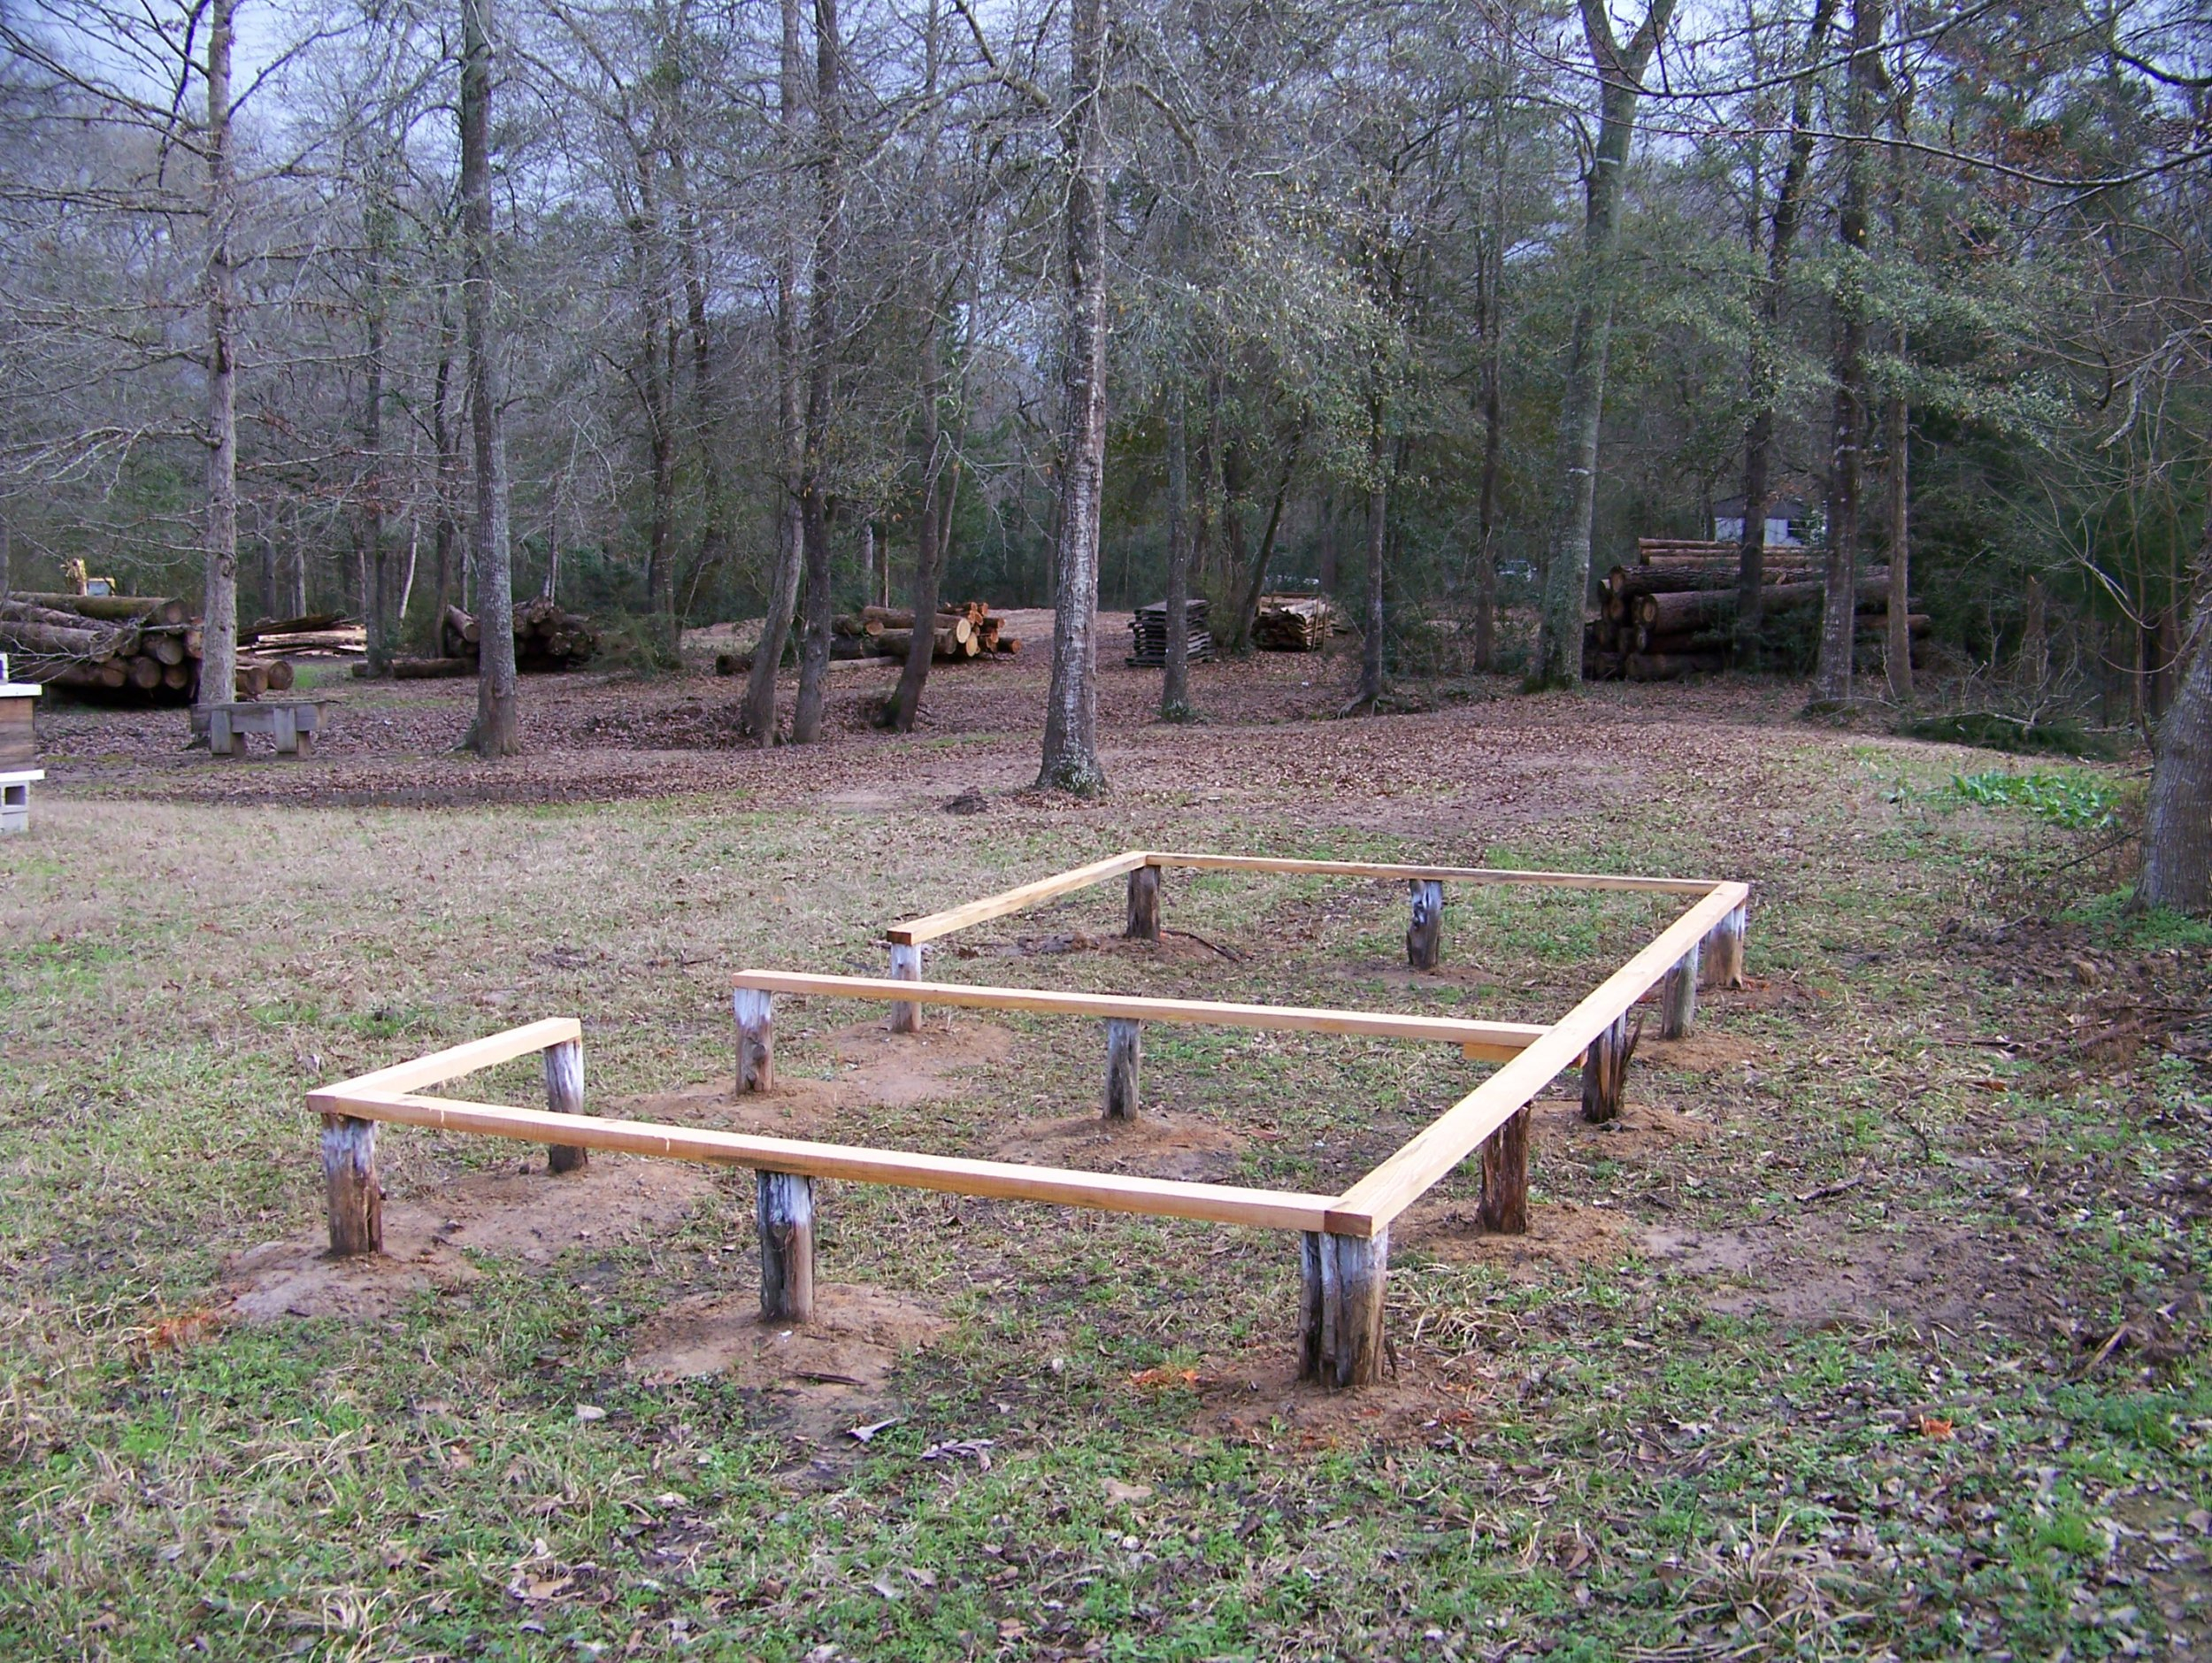 Chicken Quail Coop In Relation to Sawmill Shed Pad.jpg